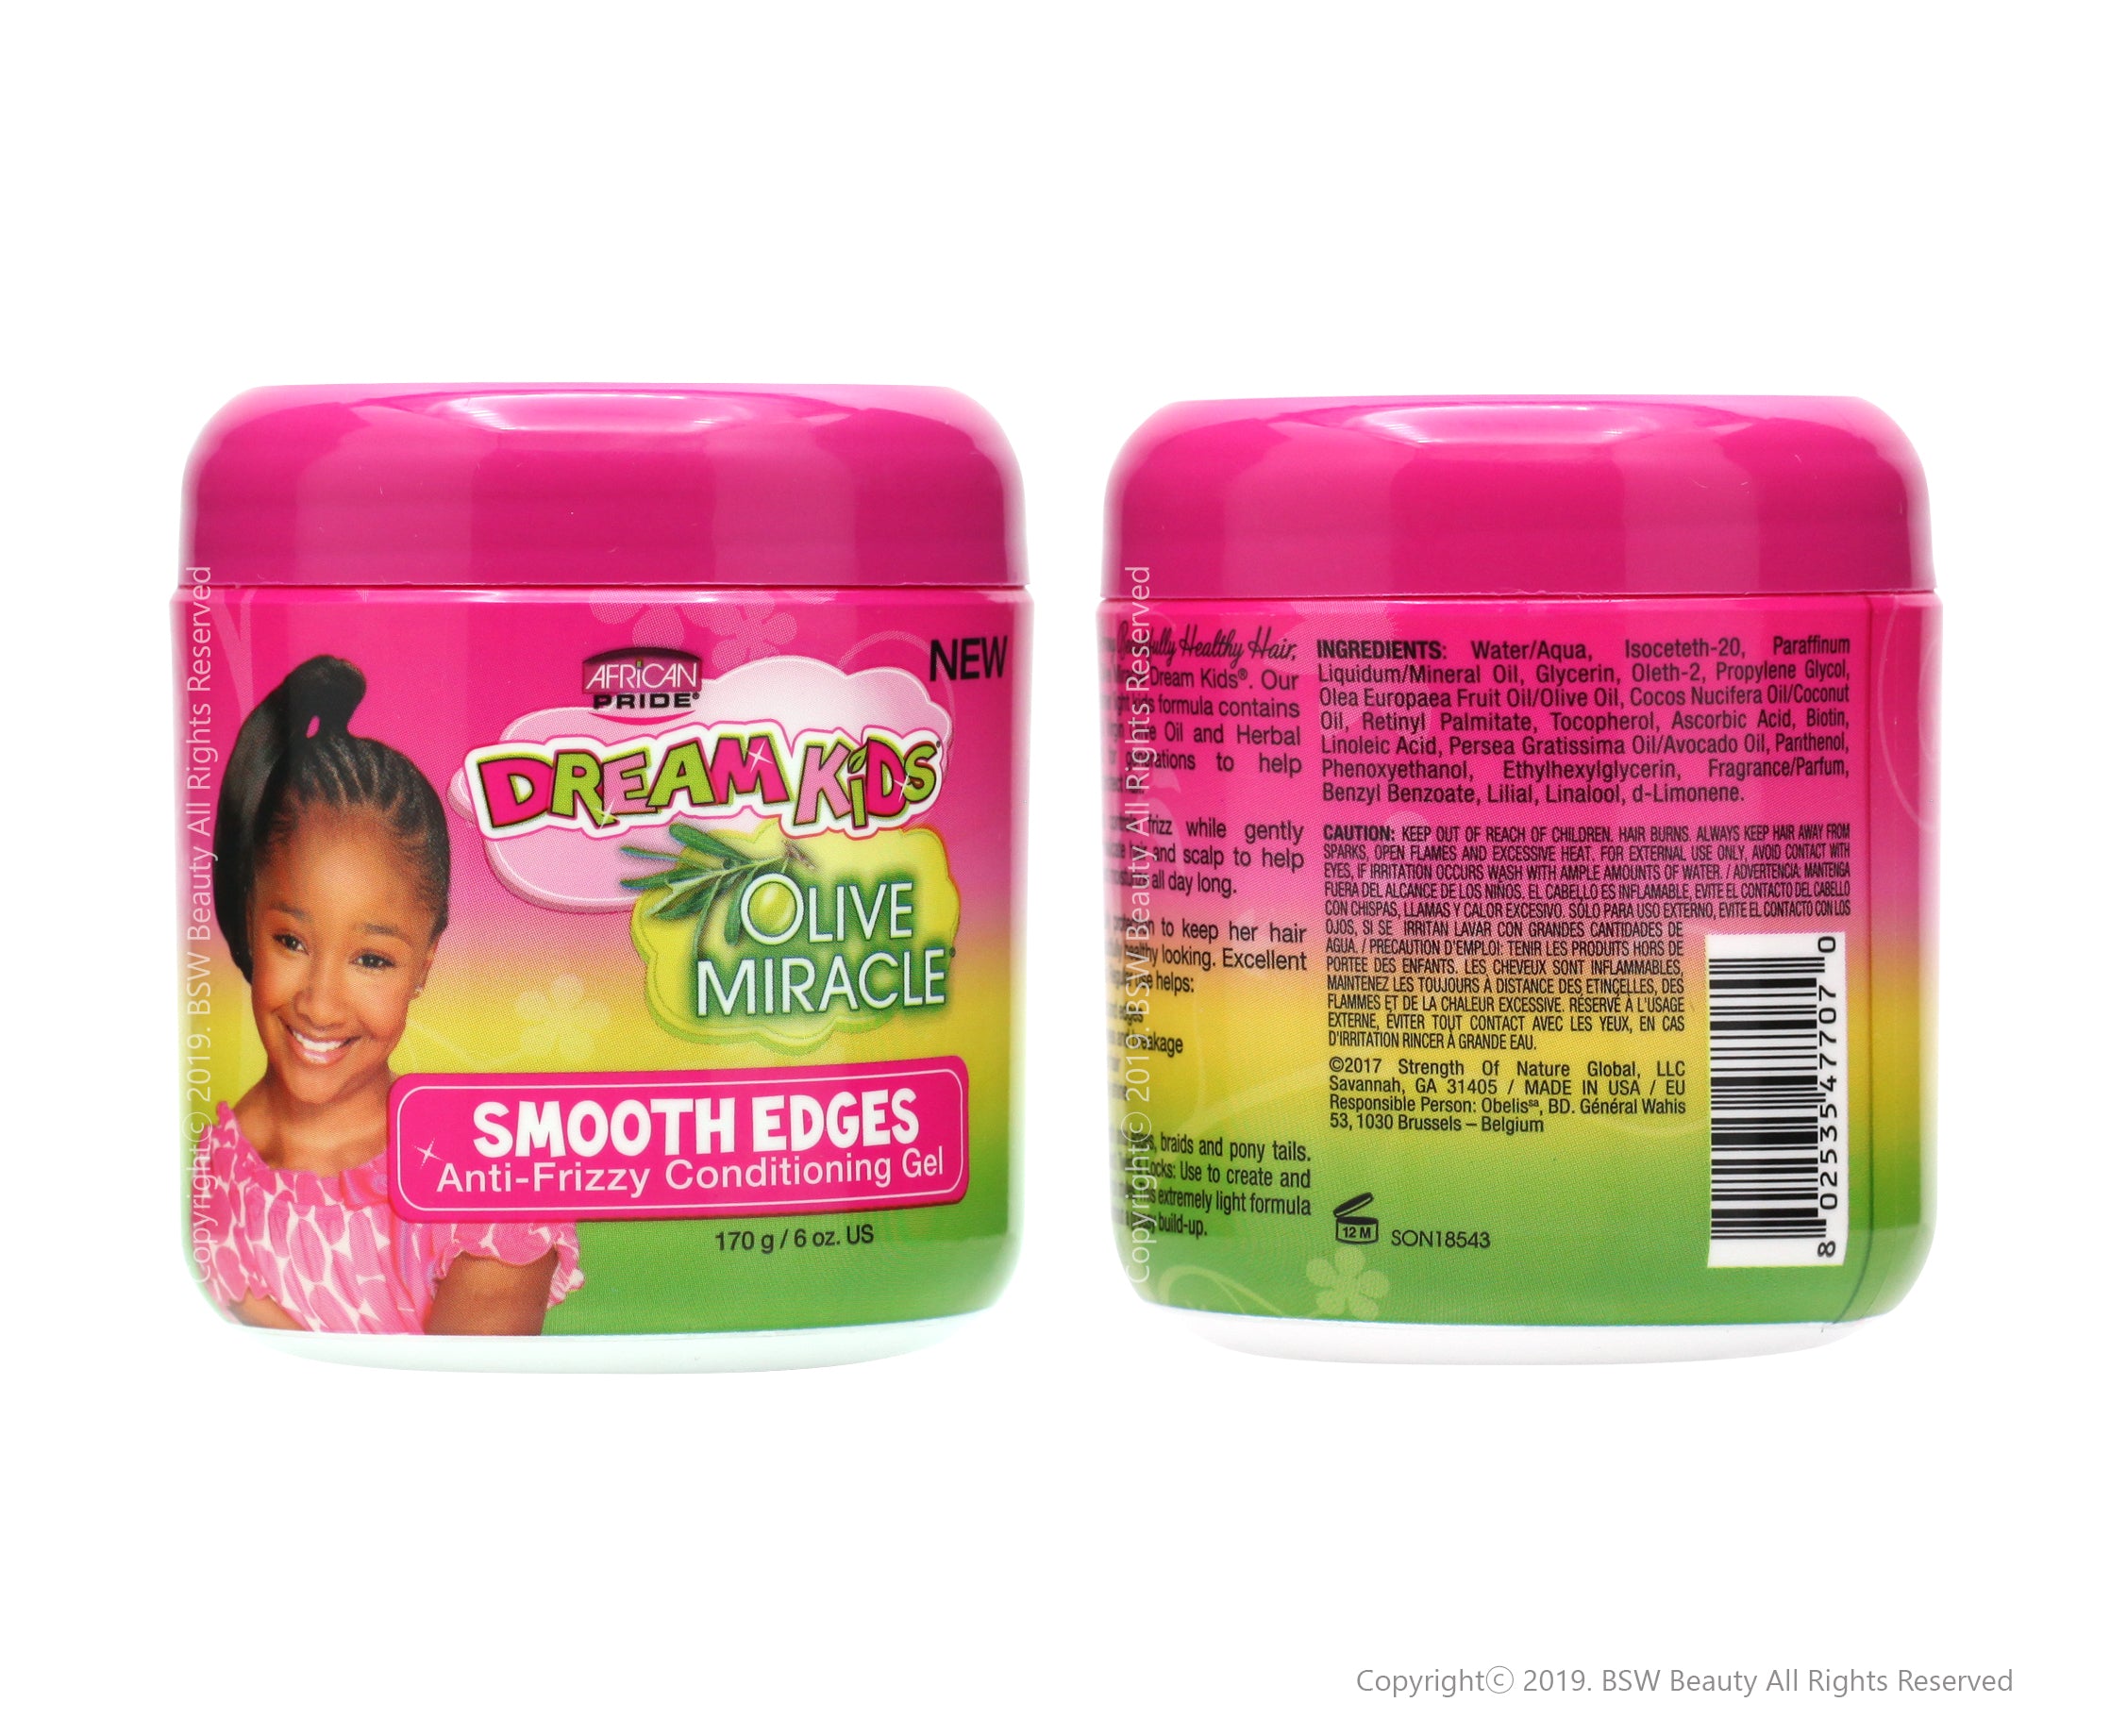 AFRICAN PRIDE DREAM KIDS OLIVE MIRACLE SMOOTH EDGES ANTI-FRIZZY CONDITIONING GEL 6oz